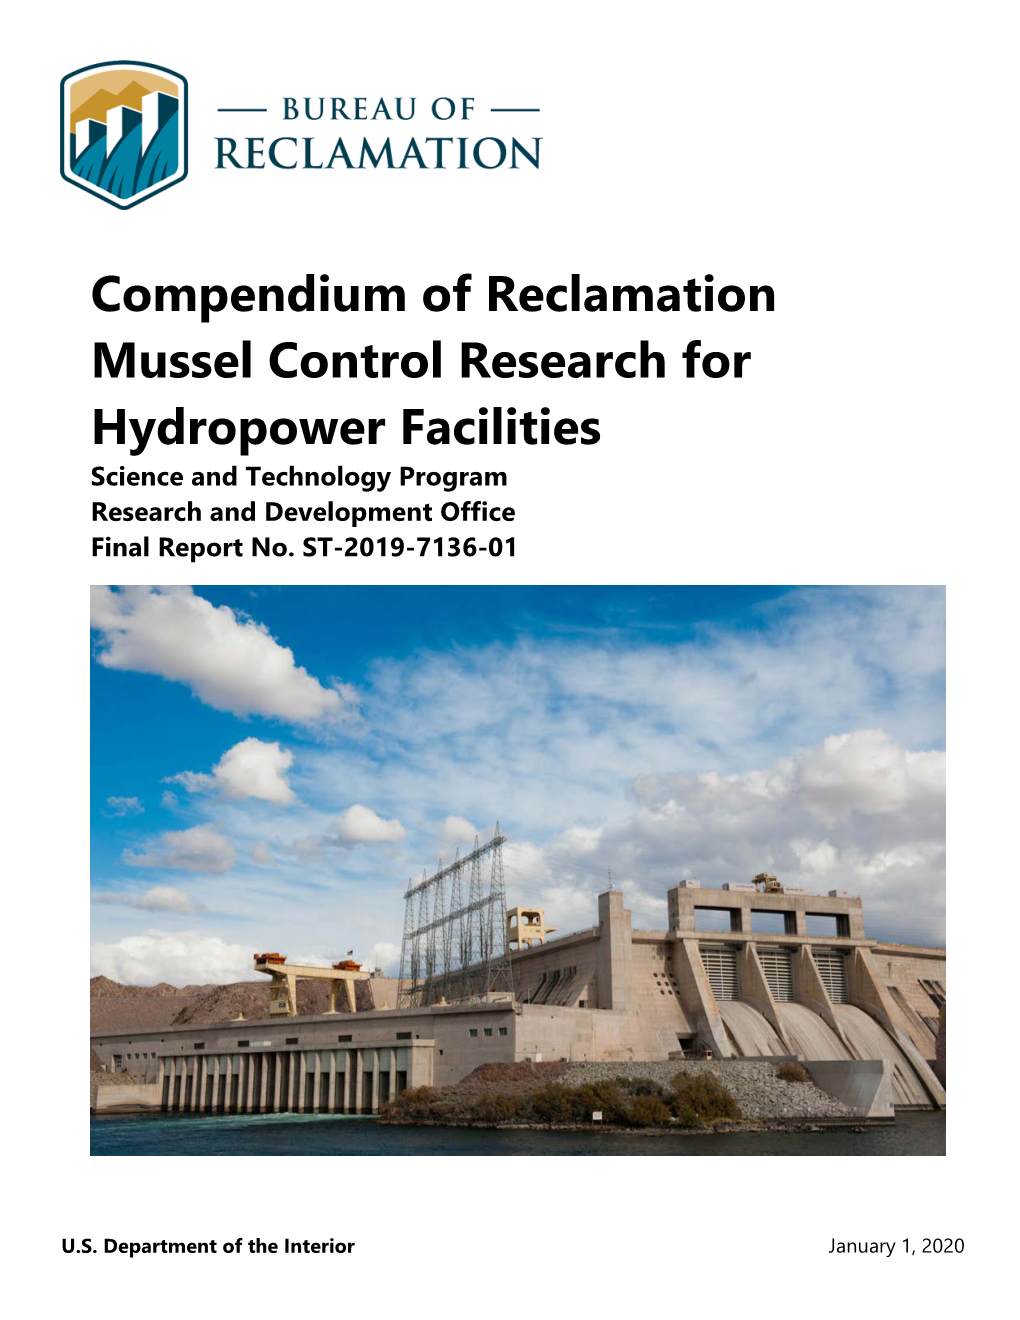 Compendium of Reclamation Mussel Control Research for Hydropower Facilities Science and Technology Program Research and Development Office Final Report No